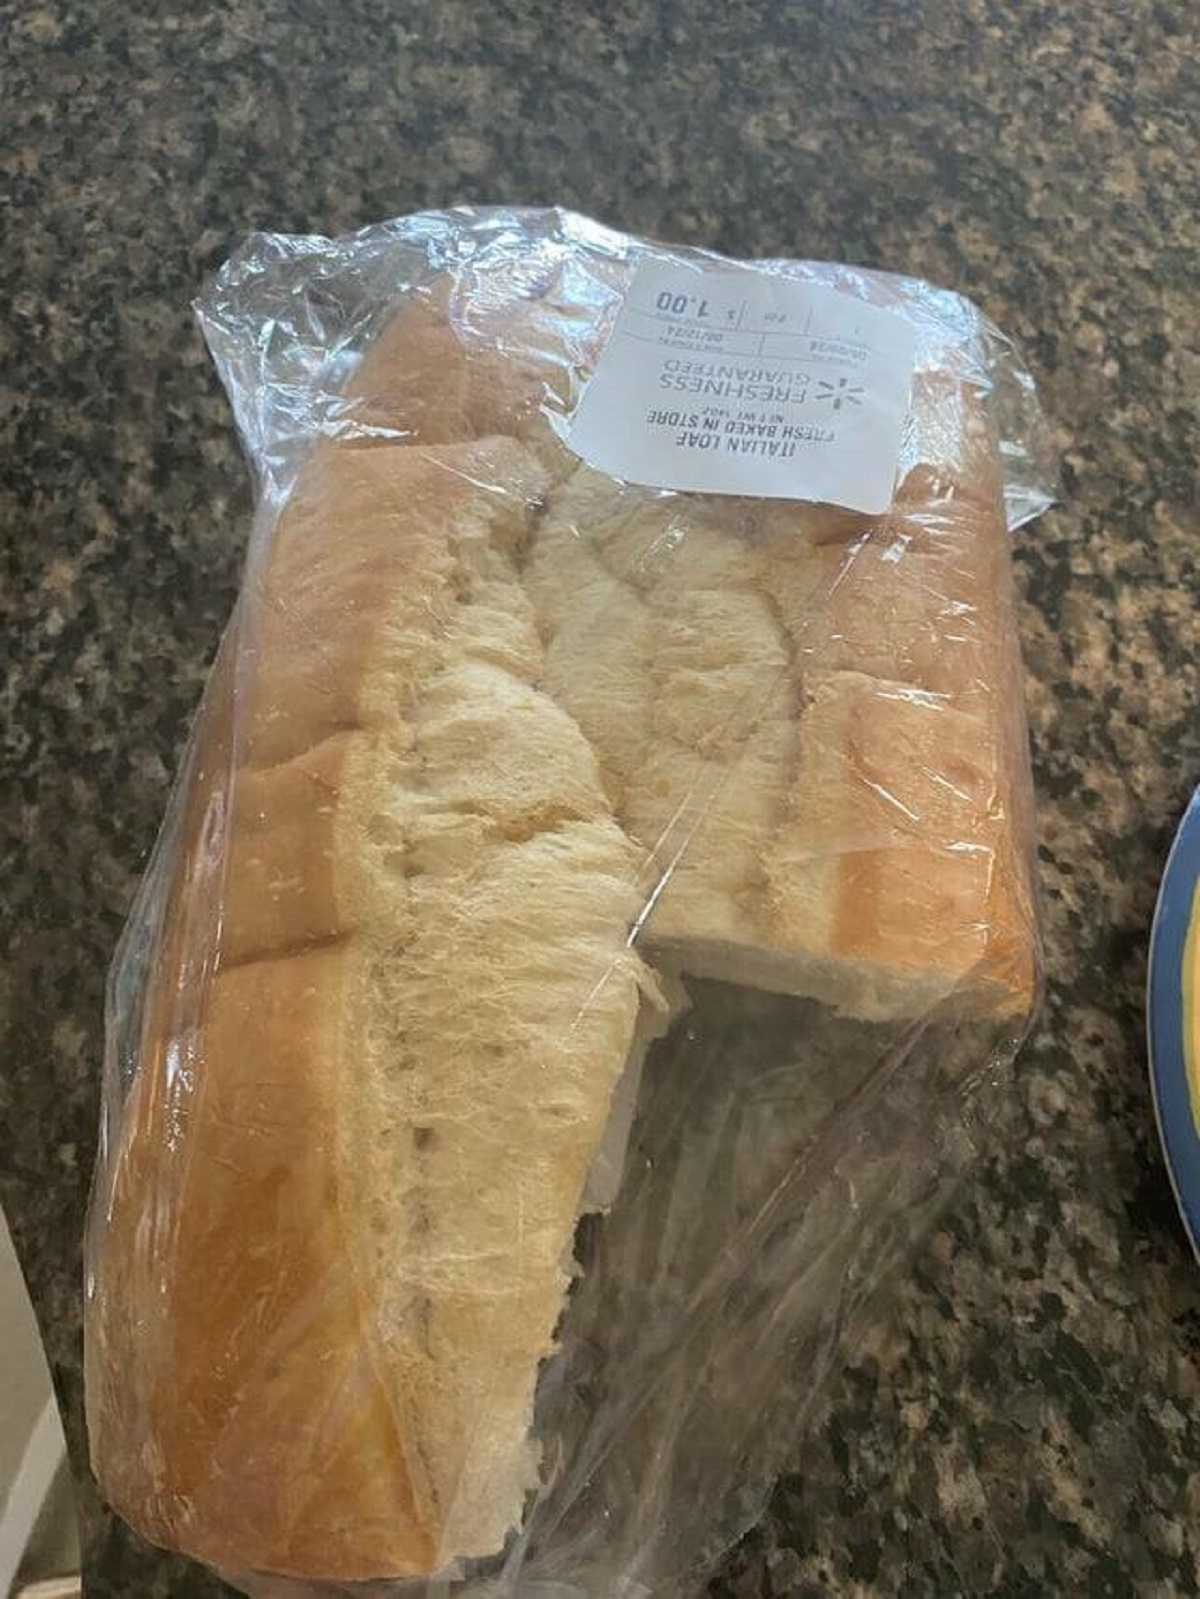 "Picked the biggest loaf at Walmart just for it to have a hole"